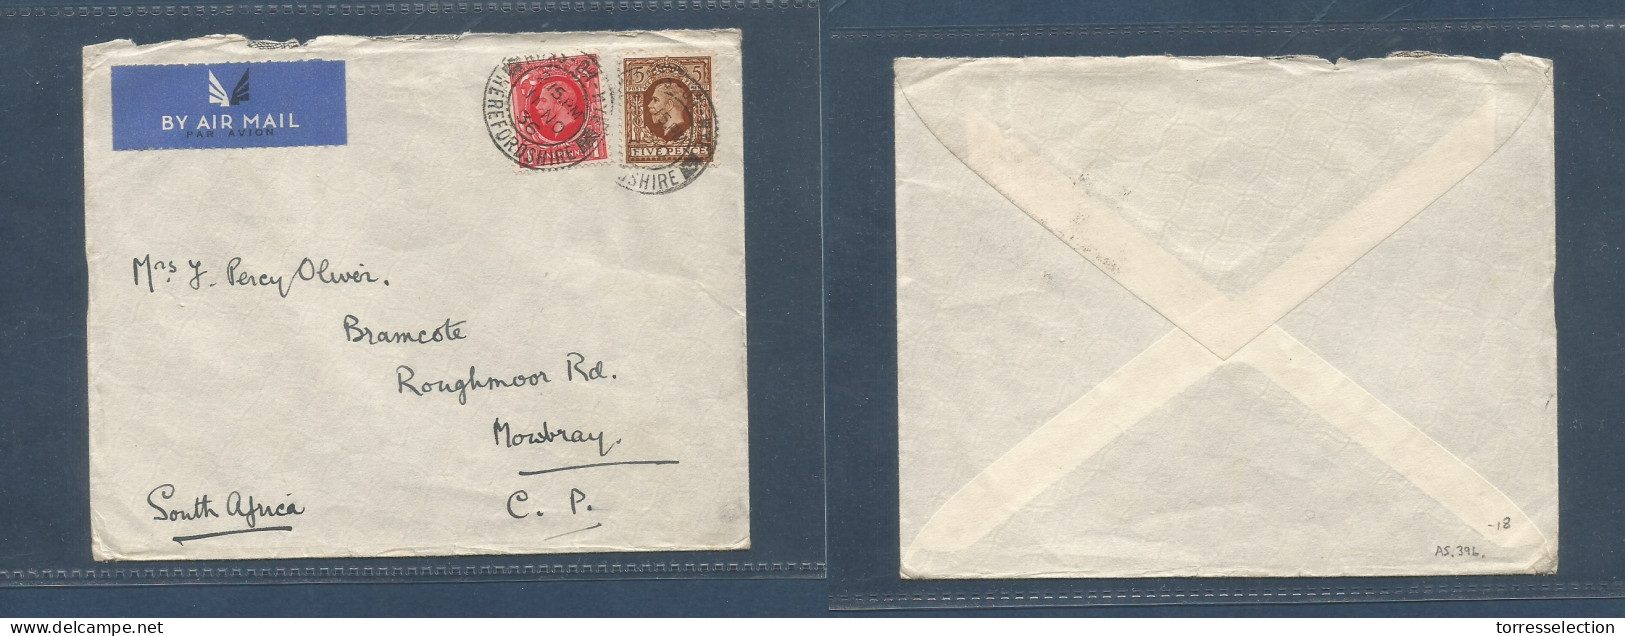 Great Britain - XX. 1936 (11 Nov) Herefordshire - South Africa, Mowbray. 6d Rate Air Imperial Fkd Envelope AS396. XSALE. - ...-1840 Prephilately